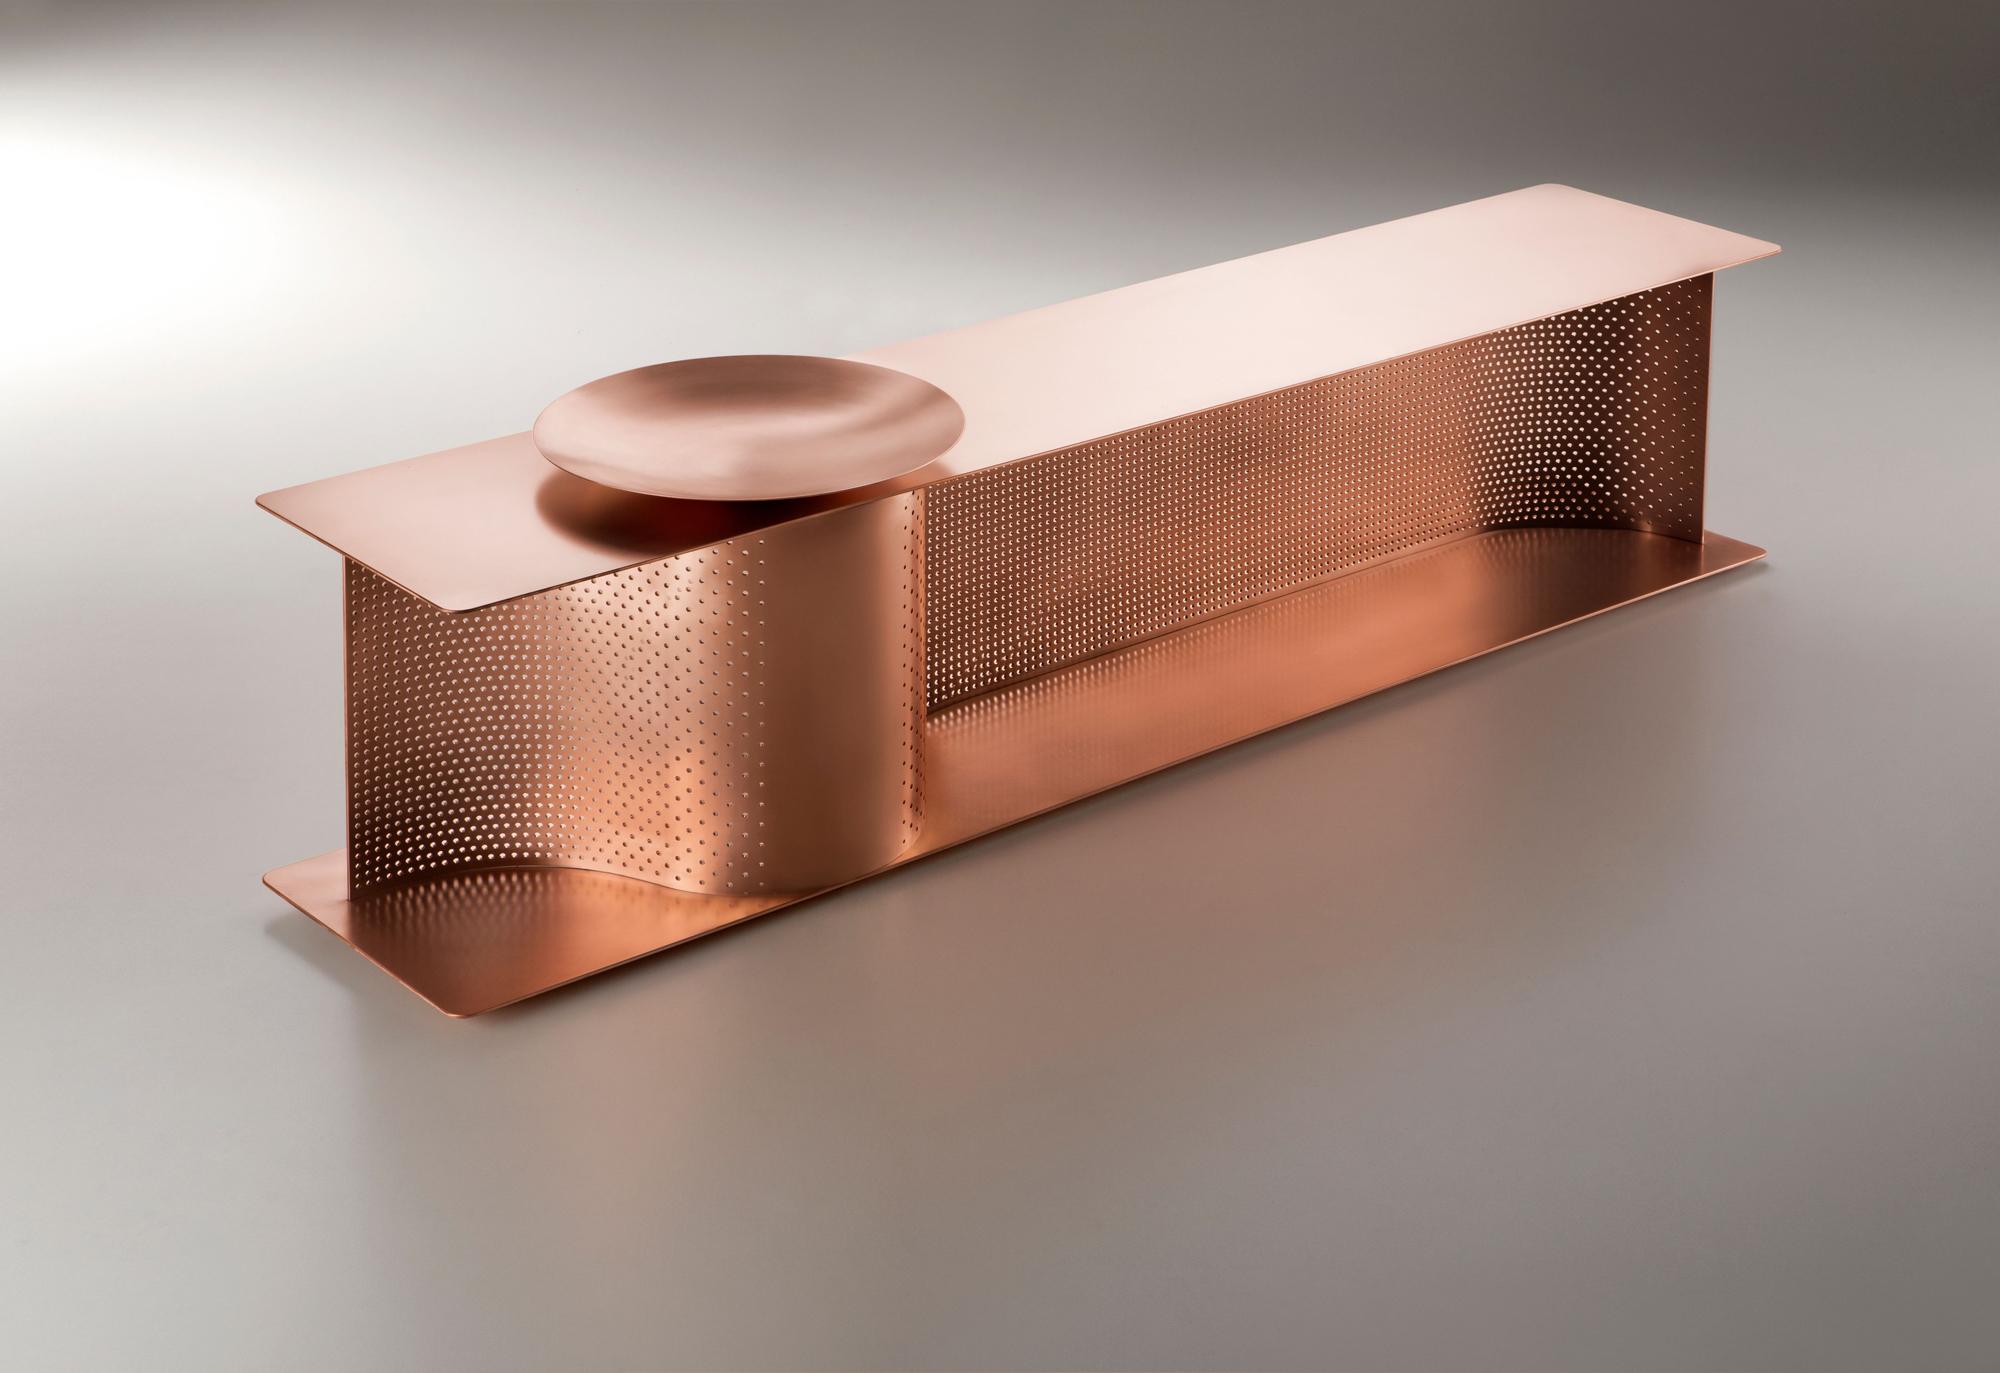 Wave Bench designed by Lanzavecchia+Wai for DeCastelli entirely made up of copper with 4mm thickness. The presence of an empty-pockets bowl creates a decorative perforated pattern. The finishing of this model is not lacquered by a protective